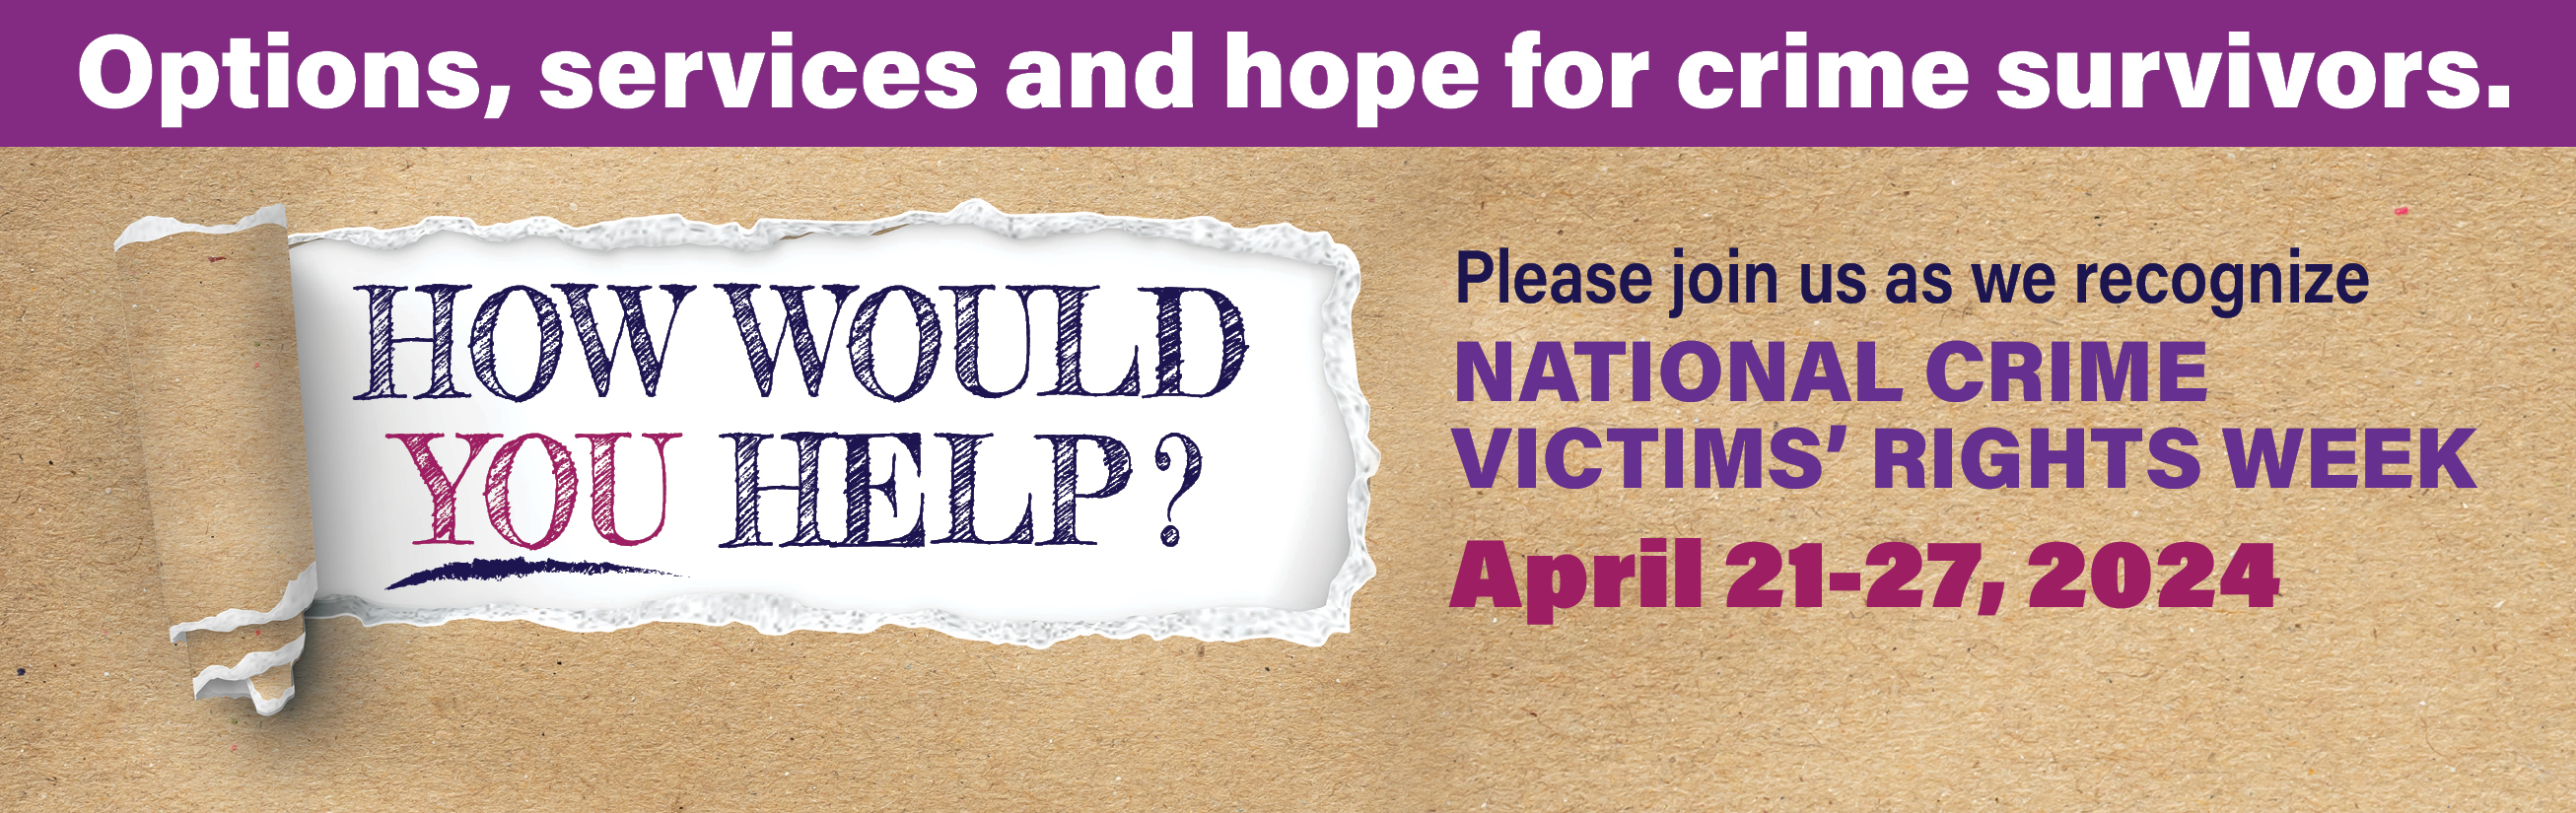 Options services and hope for crime survivors. Please join us as we recognize National Crime Victims' Rights Week April 21-27, 2024